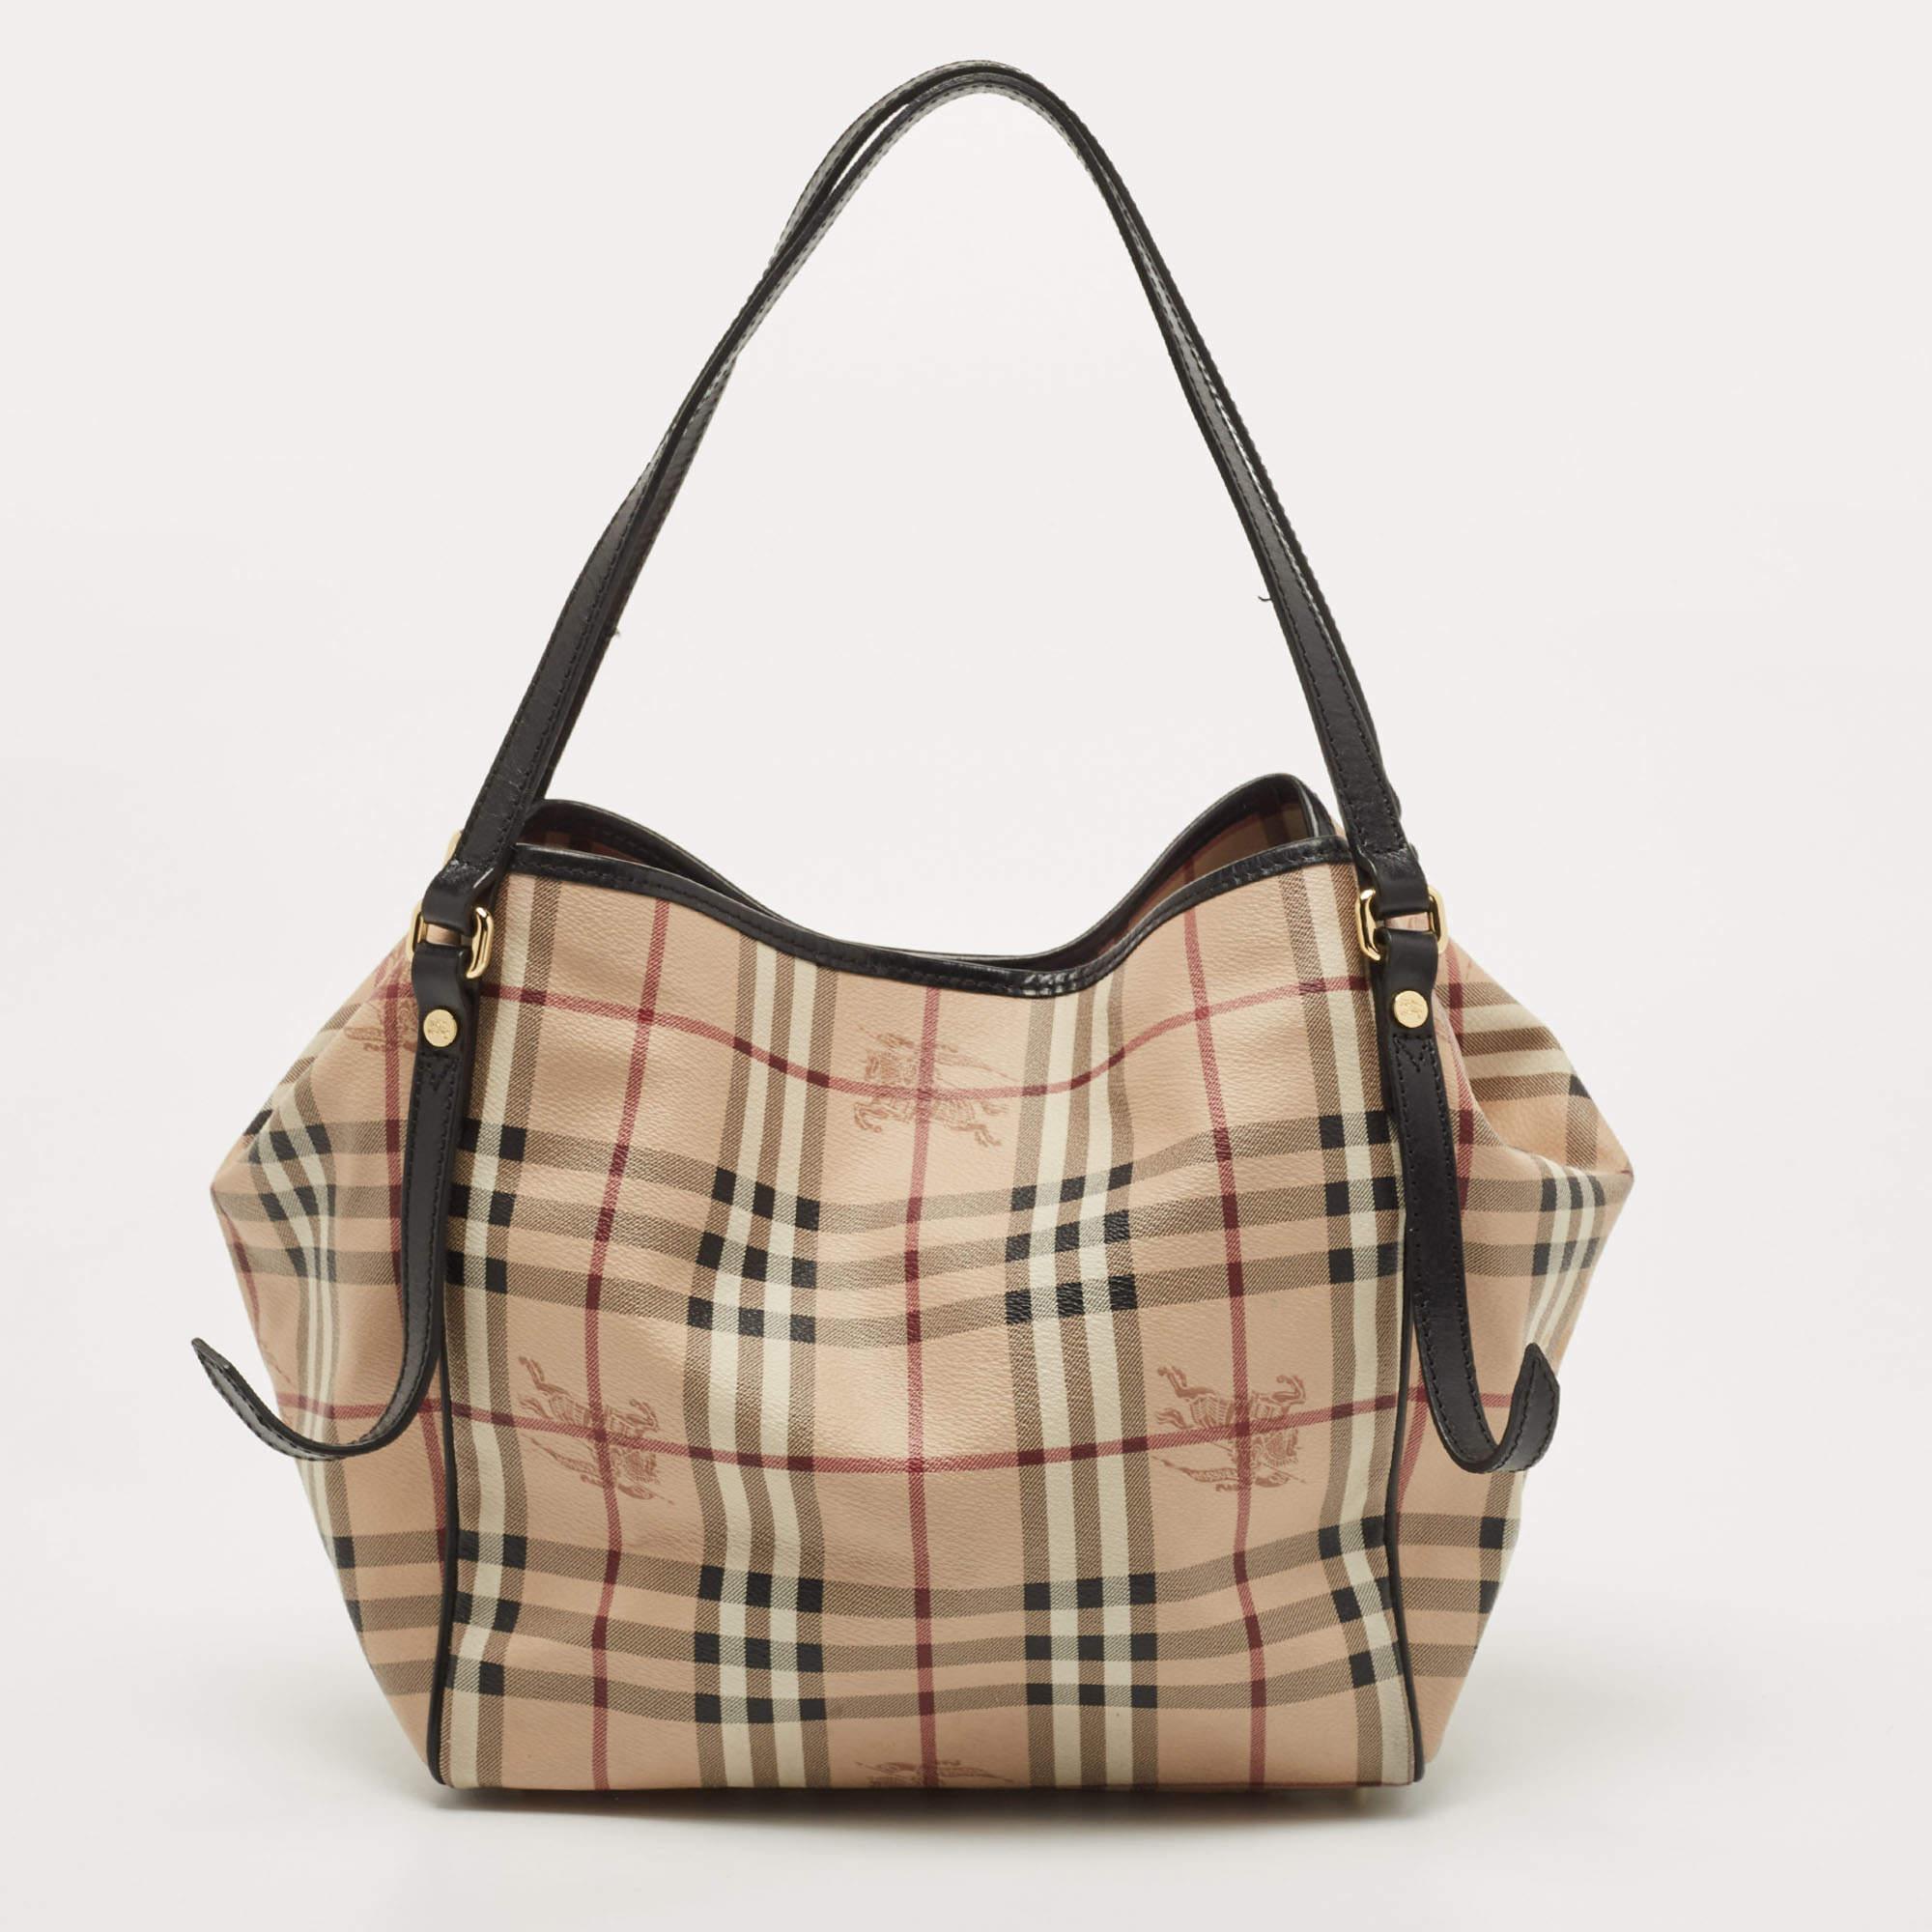 This Canterbury tote from Burberry is crafted from their signature Haymarket check PVC and enhanced with leather. It comes with dual flat handles, protective metal feet, and a canvas-lined interior that can hold all your daily necessities. Simple in